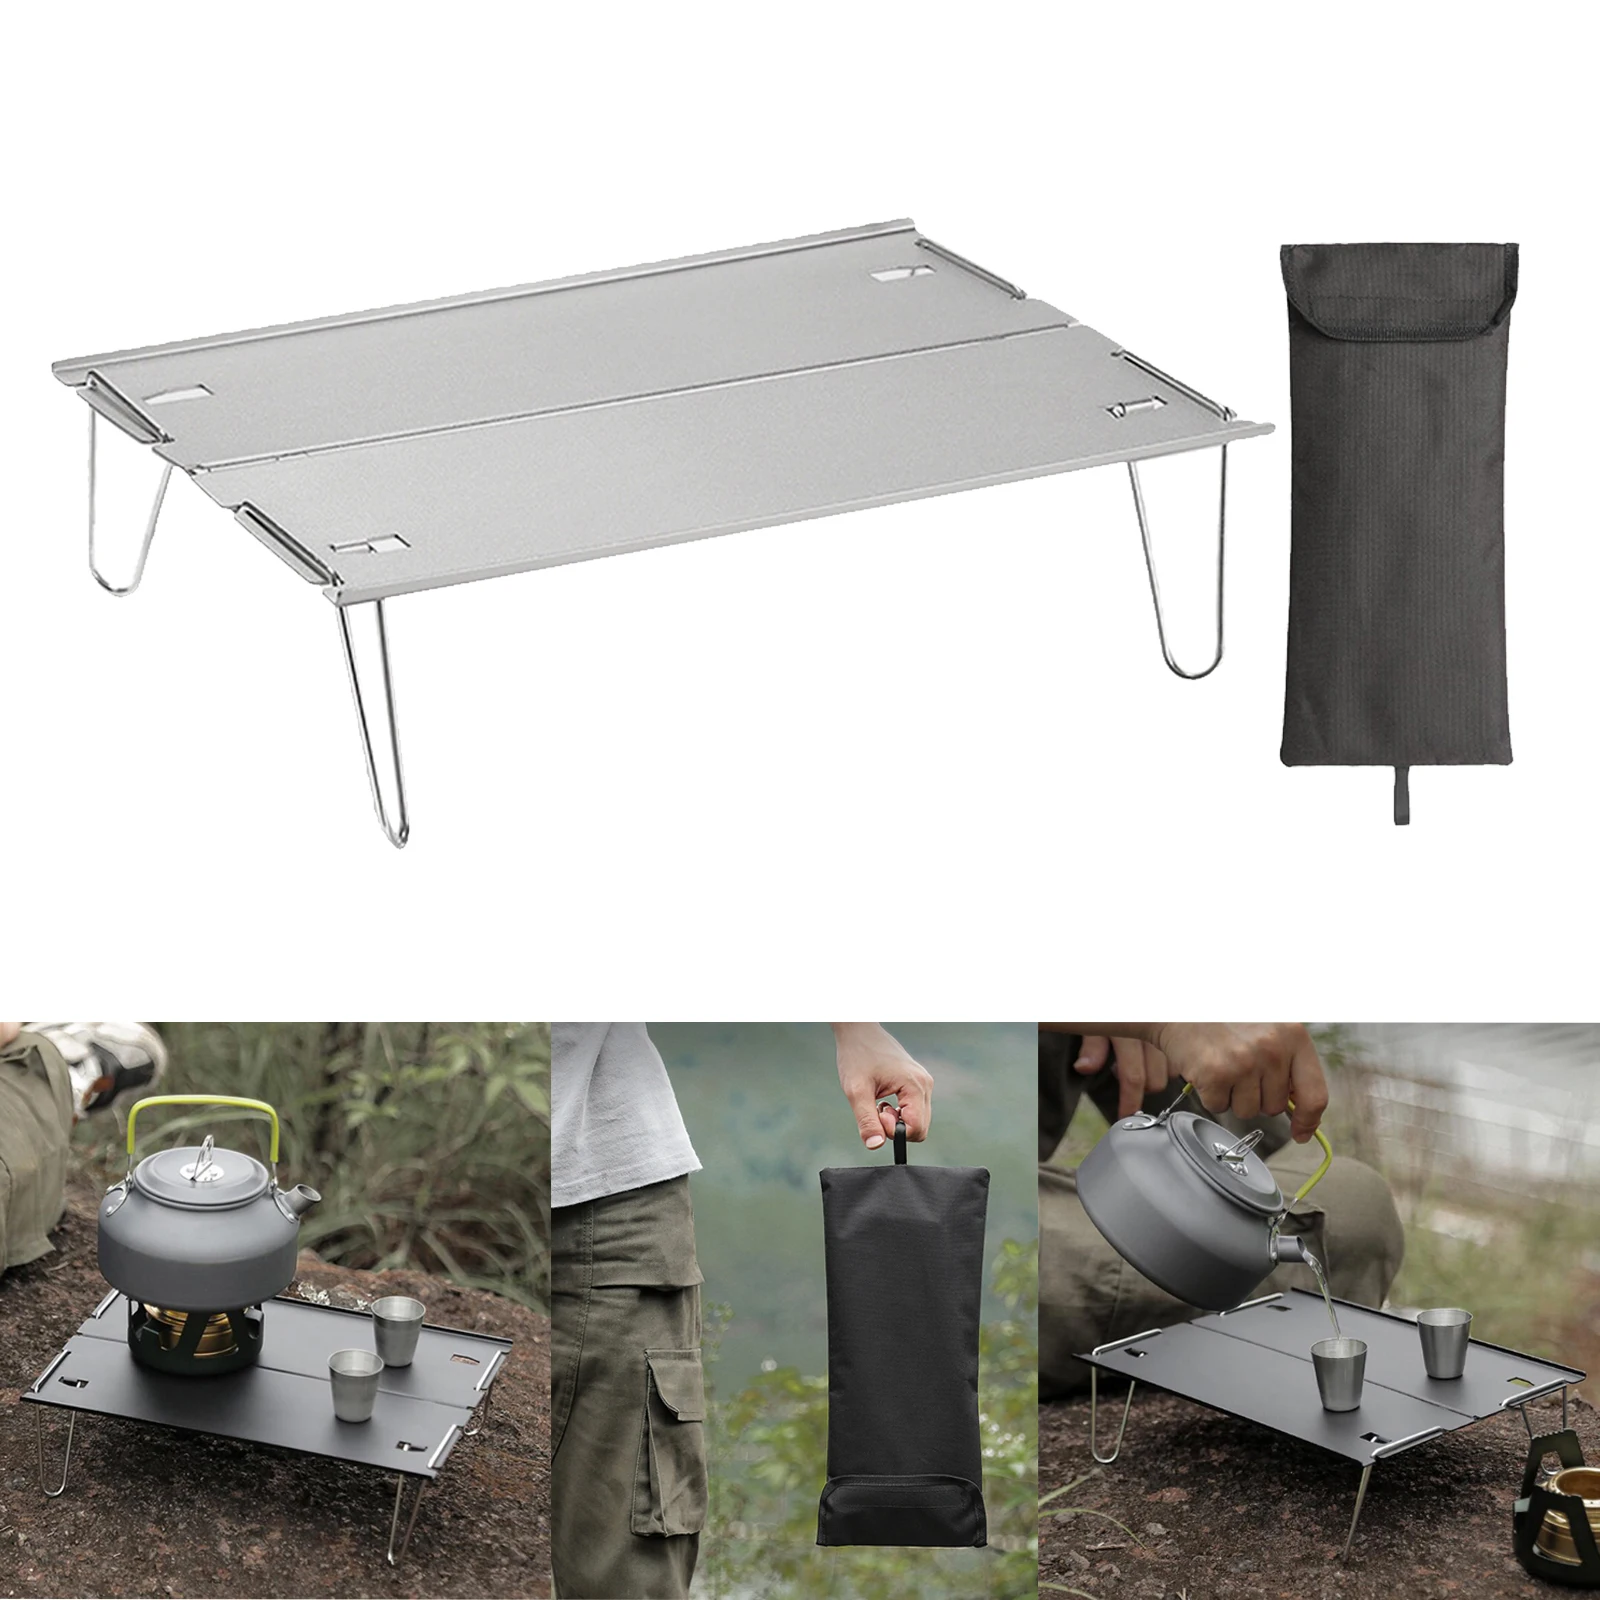 Mini Outdoor Folding Table Portable Ultra-light Aluminum Alloy Collapsible Backpacking Hiking BBQ Garden Camping Fishing Desk